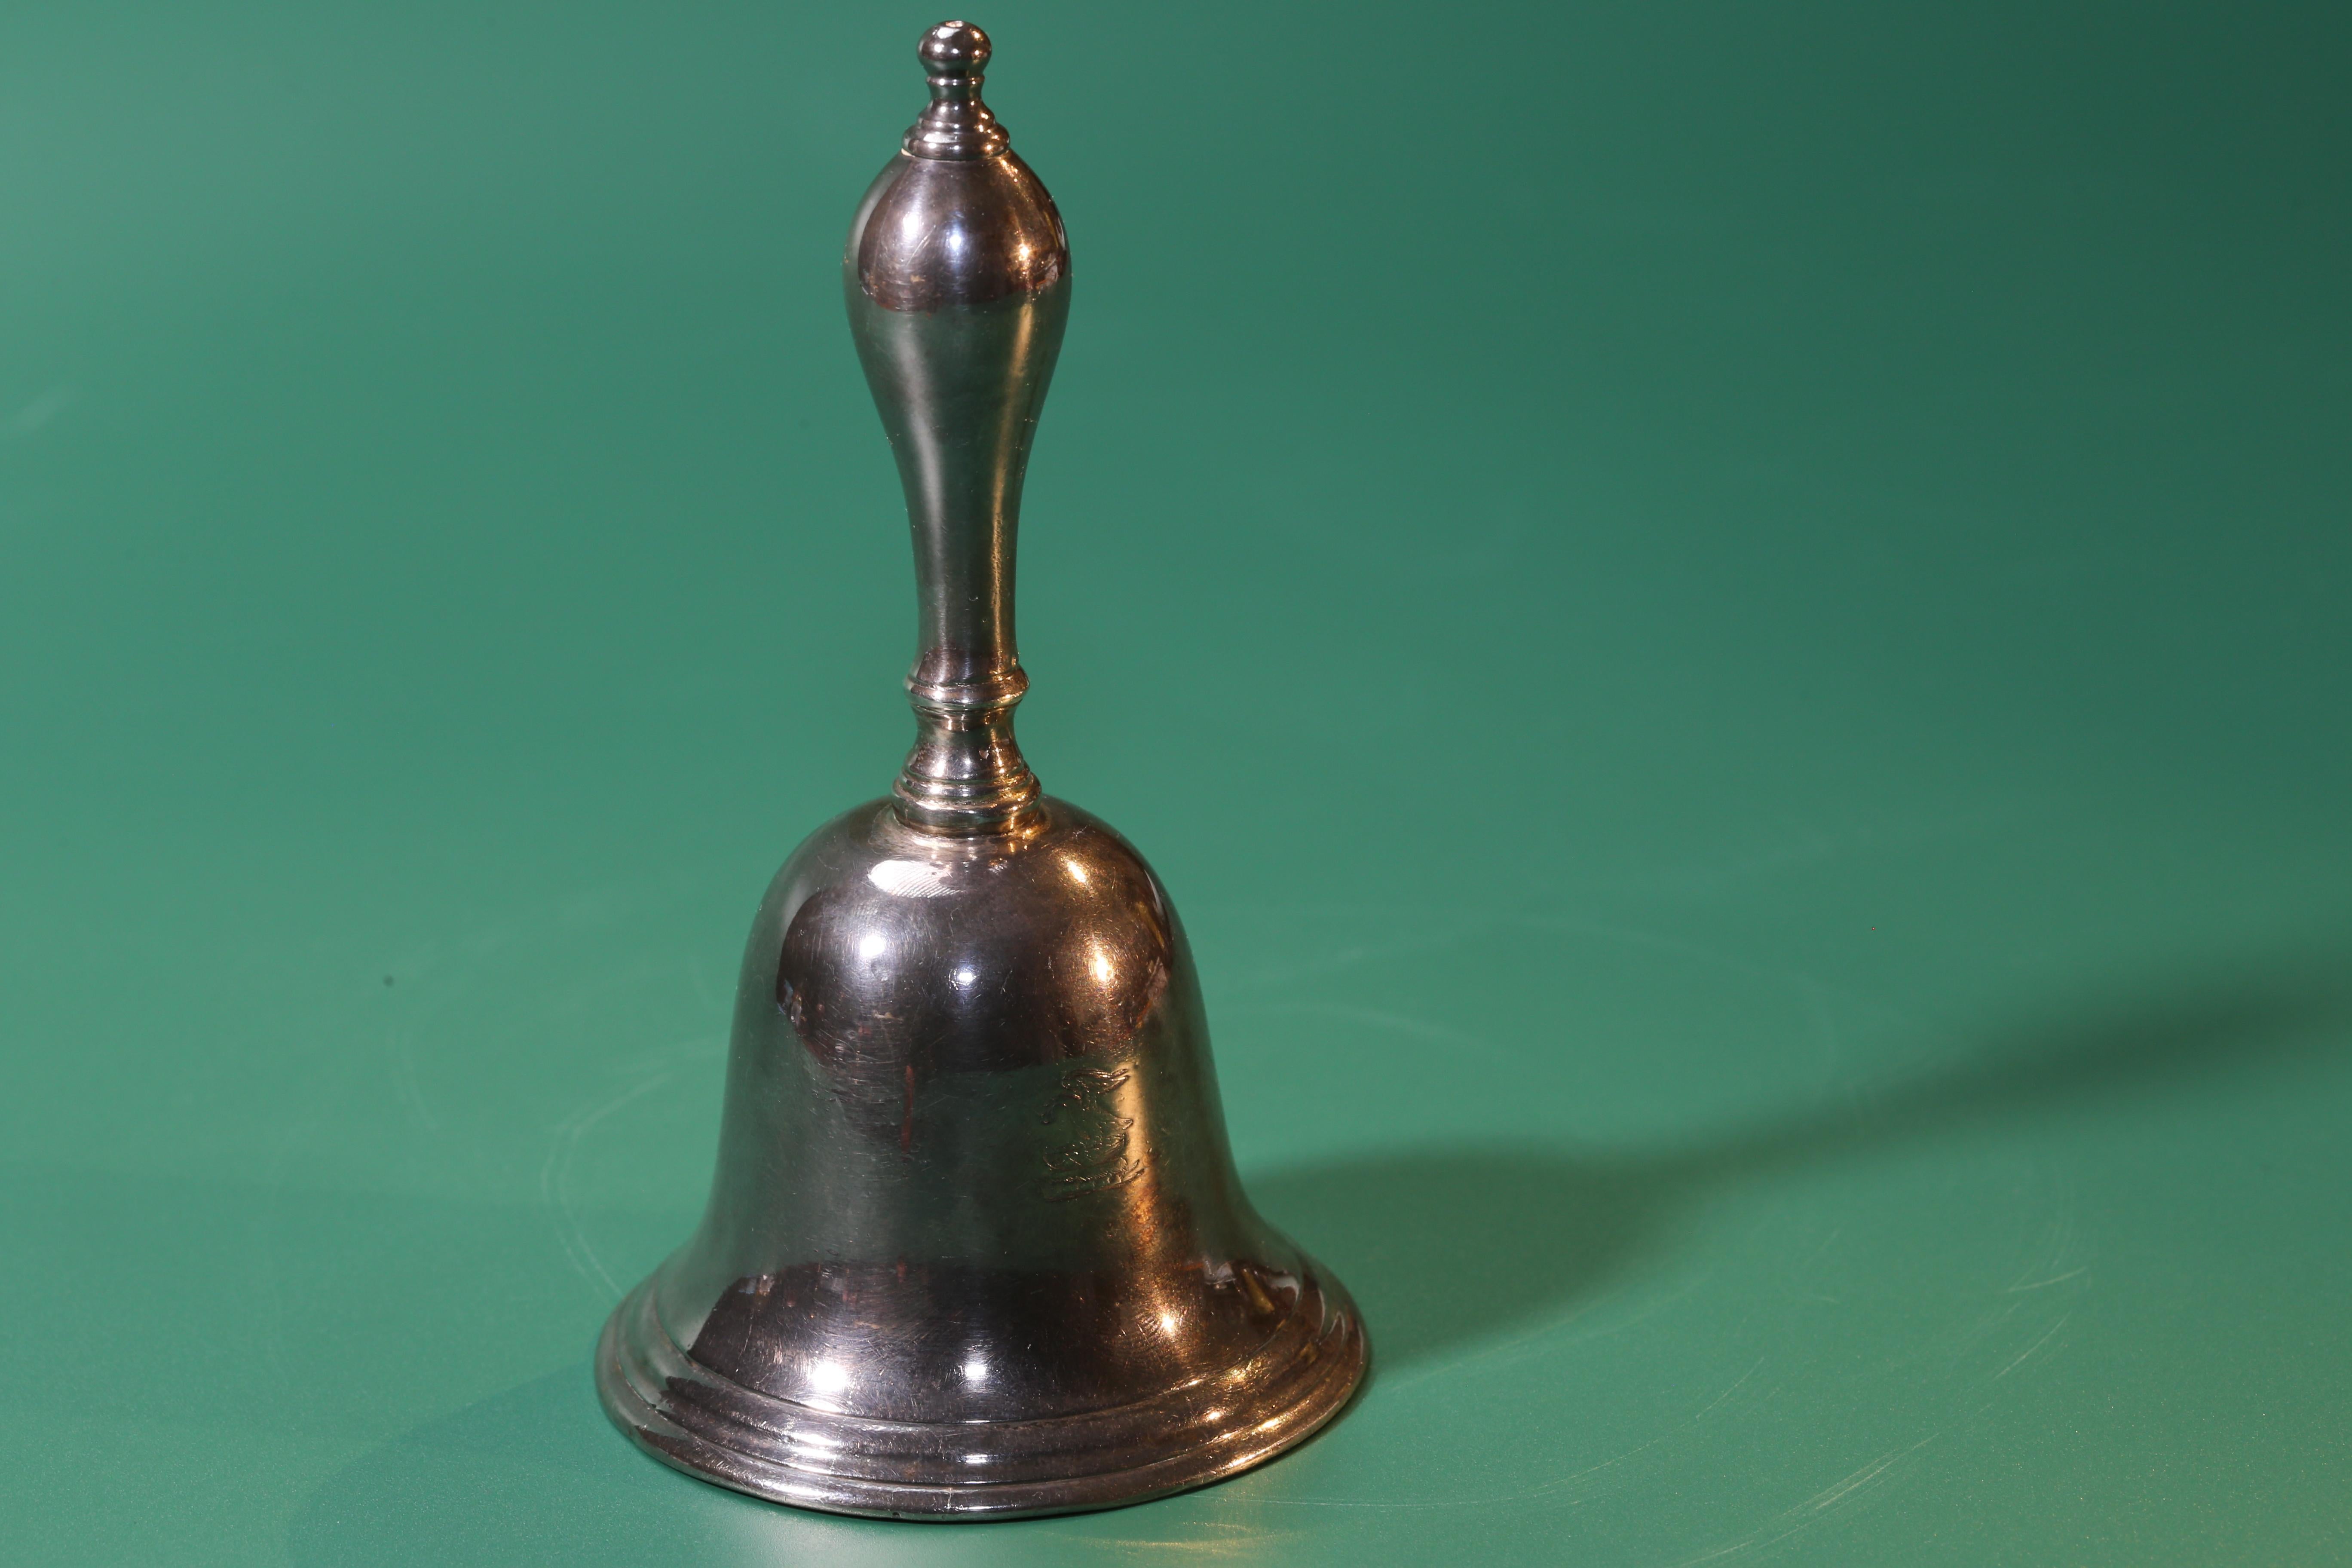 British Violet Trefusis's George II Silver Table Bell, Christie's 2012 Auction For Sale